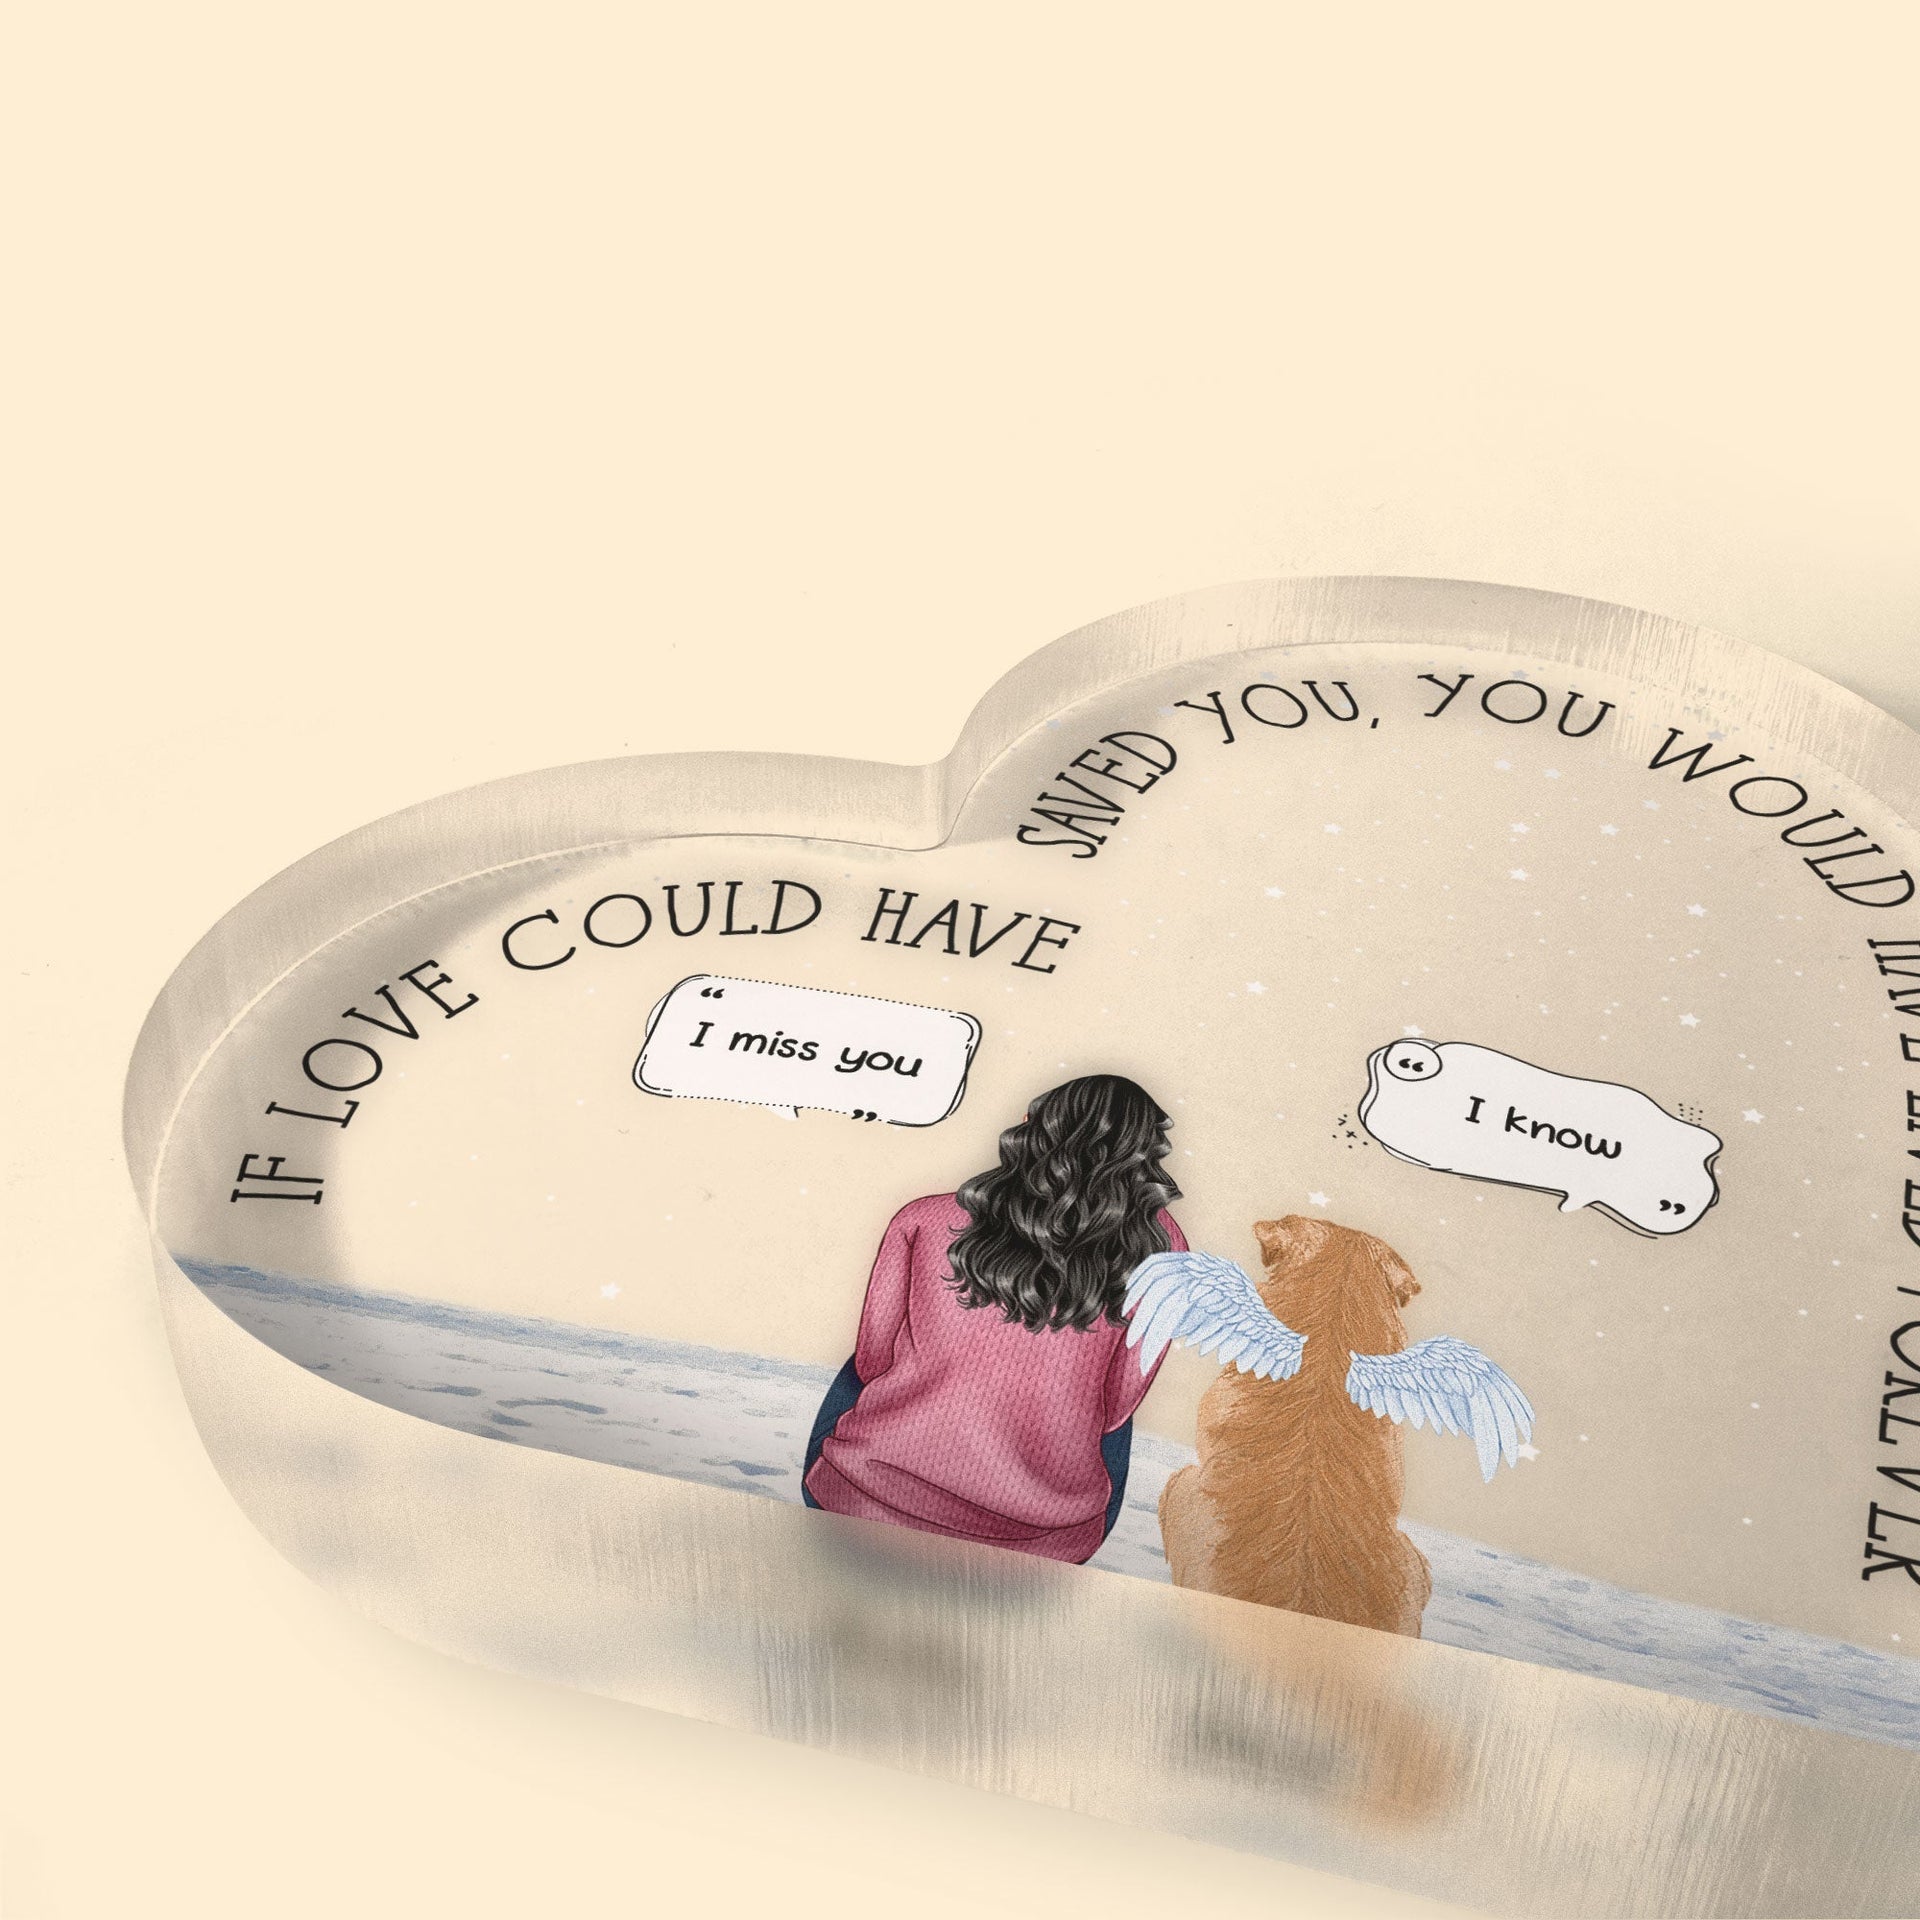 Memorial Pet - Personalized Heart Shaped Acrylic Plaque - Christmas, Memorial, Loving Gift For Pet Loss Owners, Dog Mom, Dog Dad, Cat Mom, Cat Lover, Dog Lover